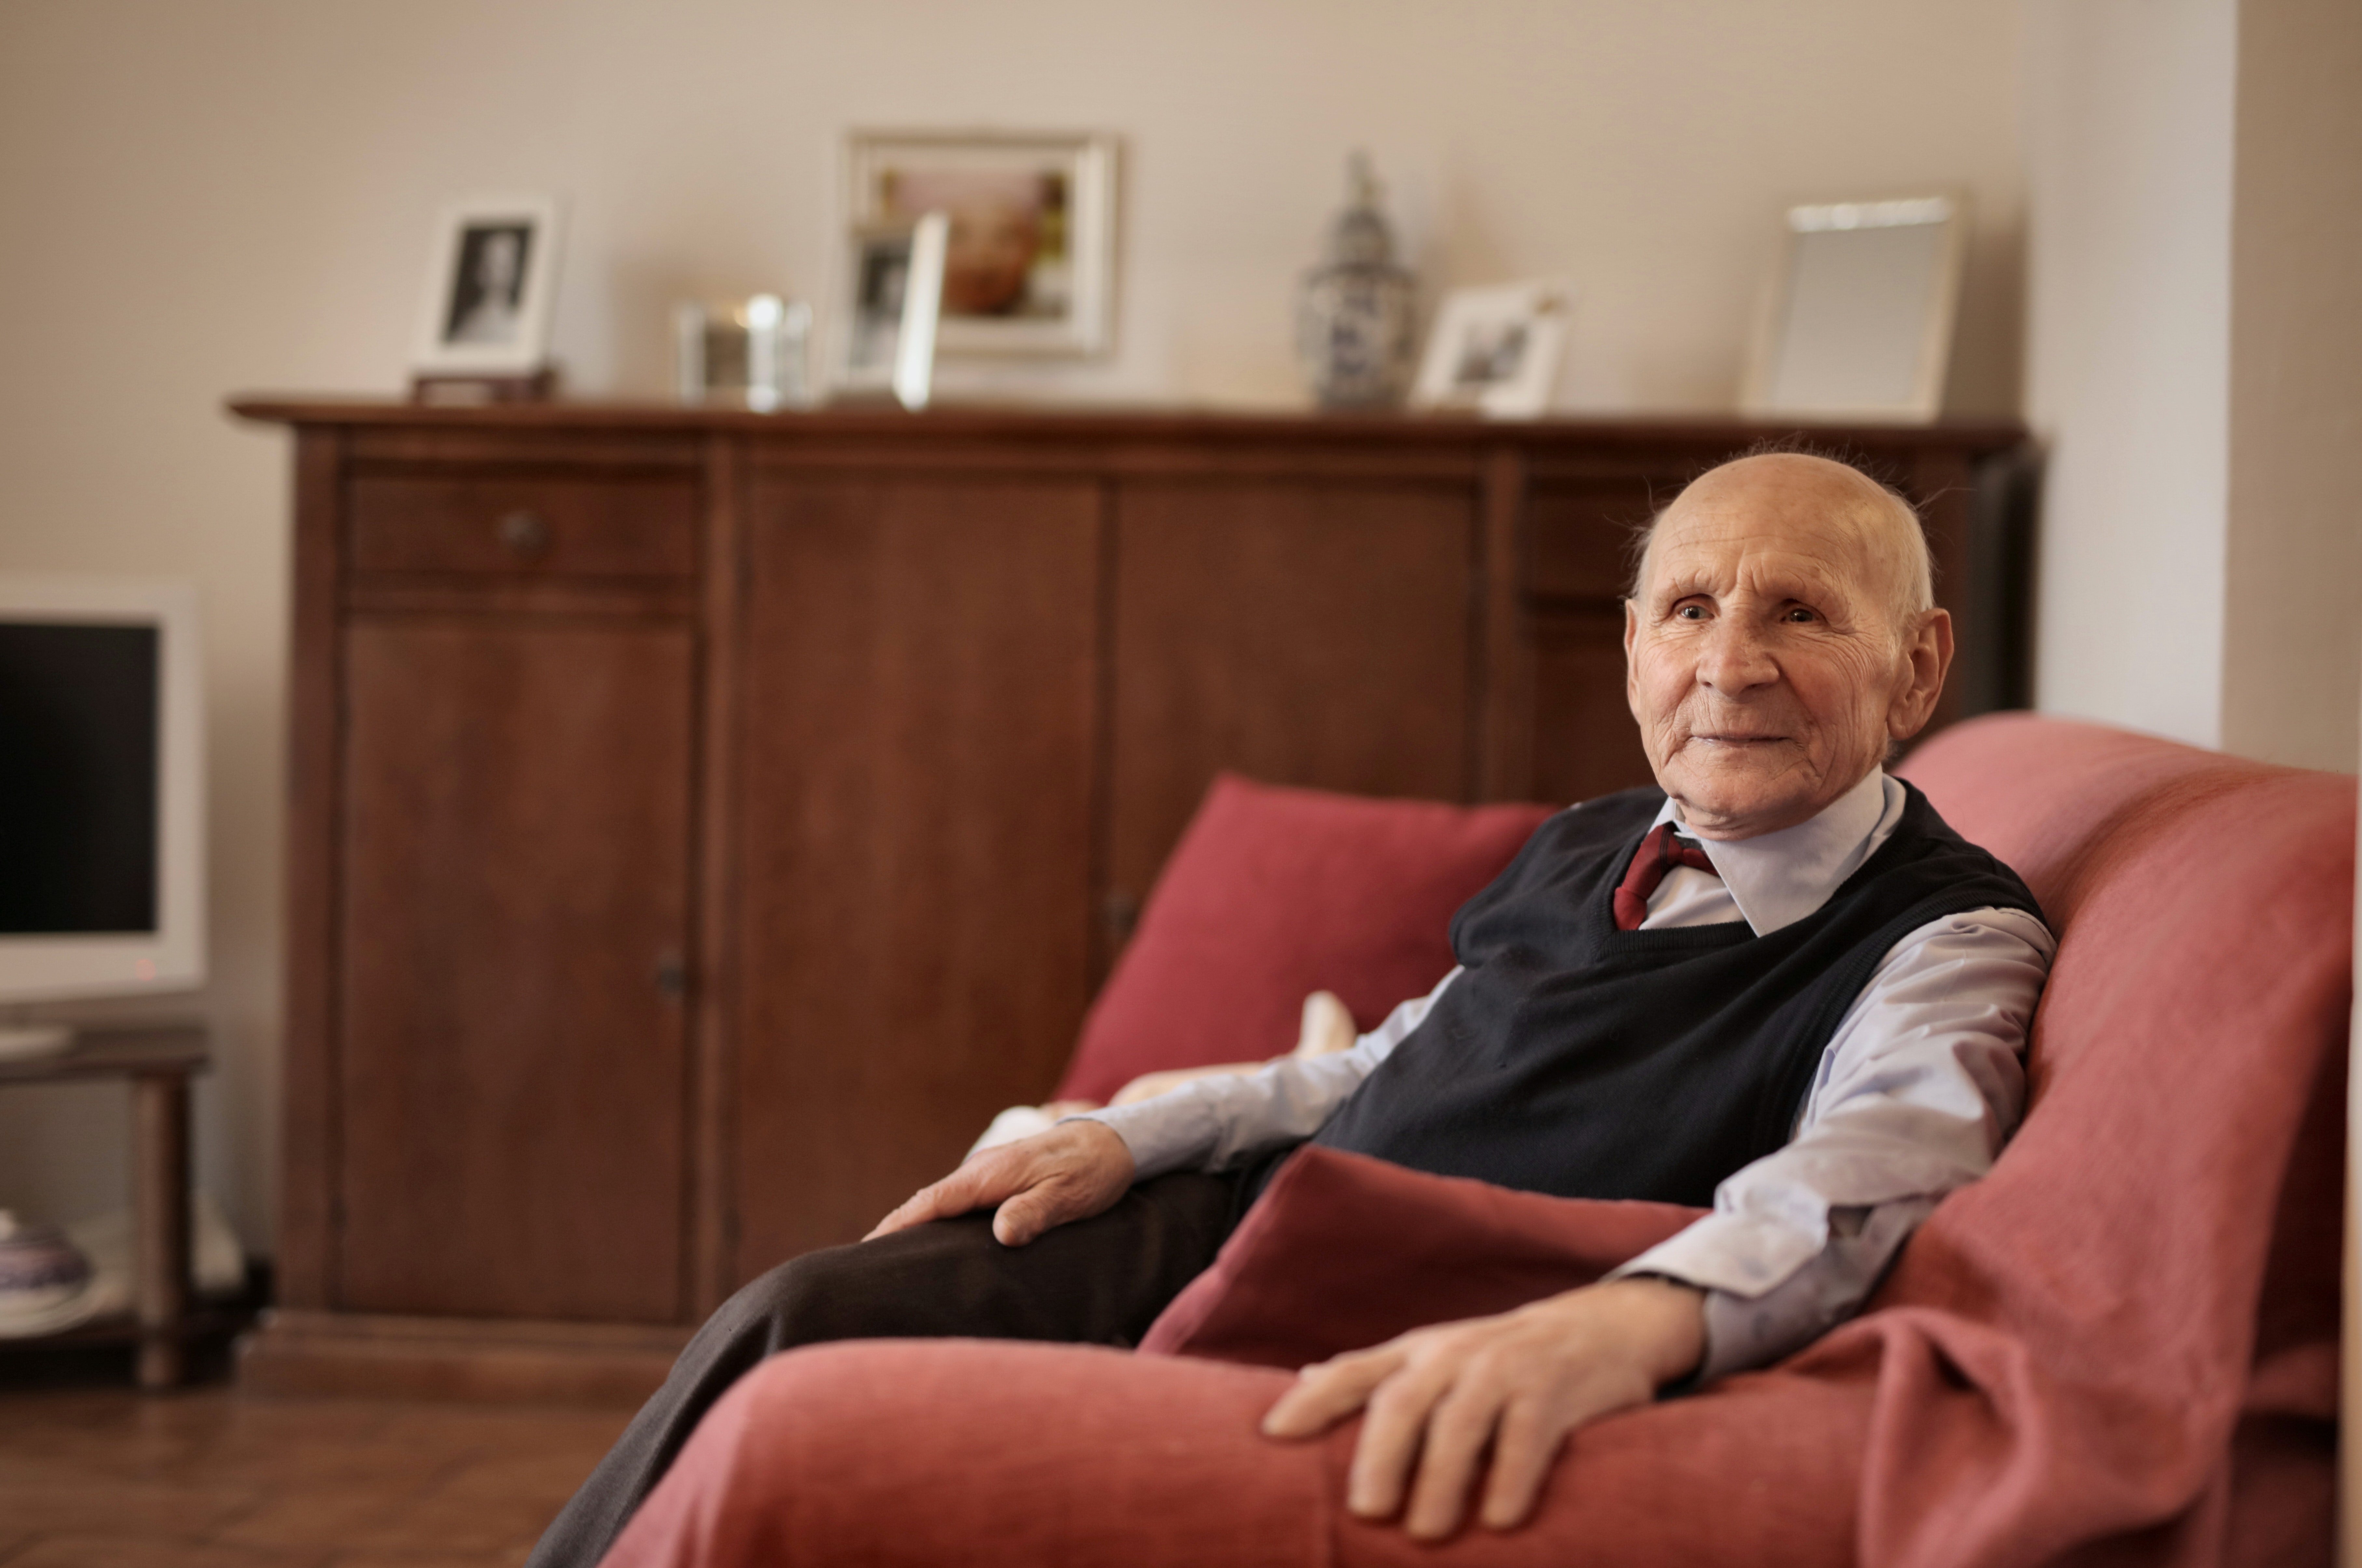 An elderly man sitting on a couch. | Pexels/ Andrea Piacquadio